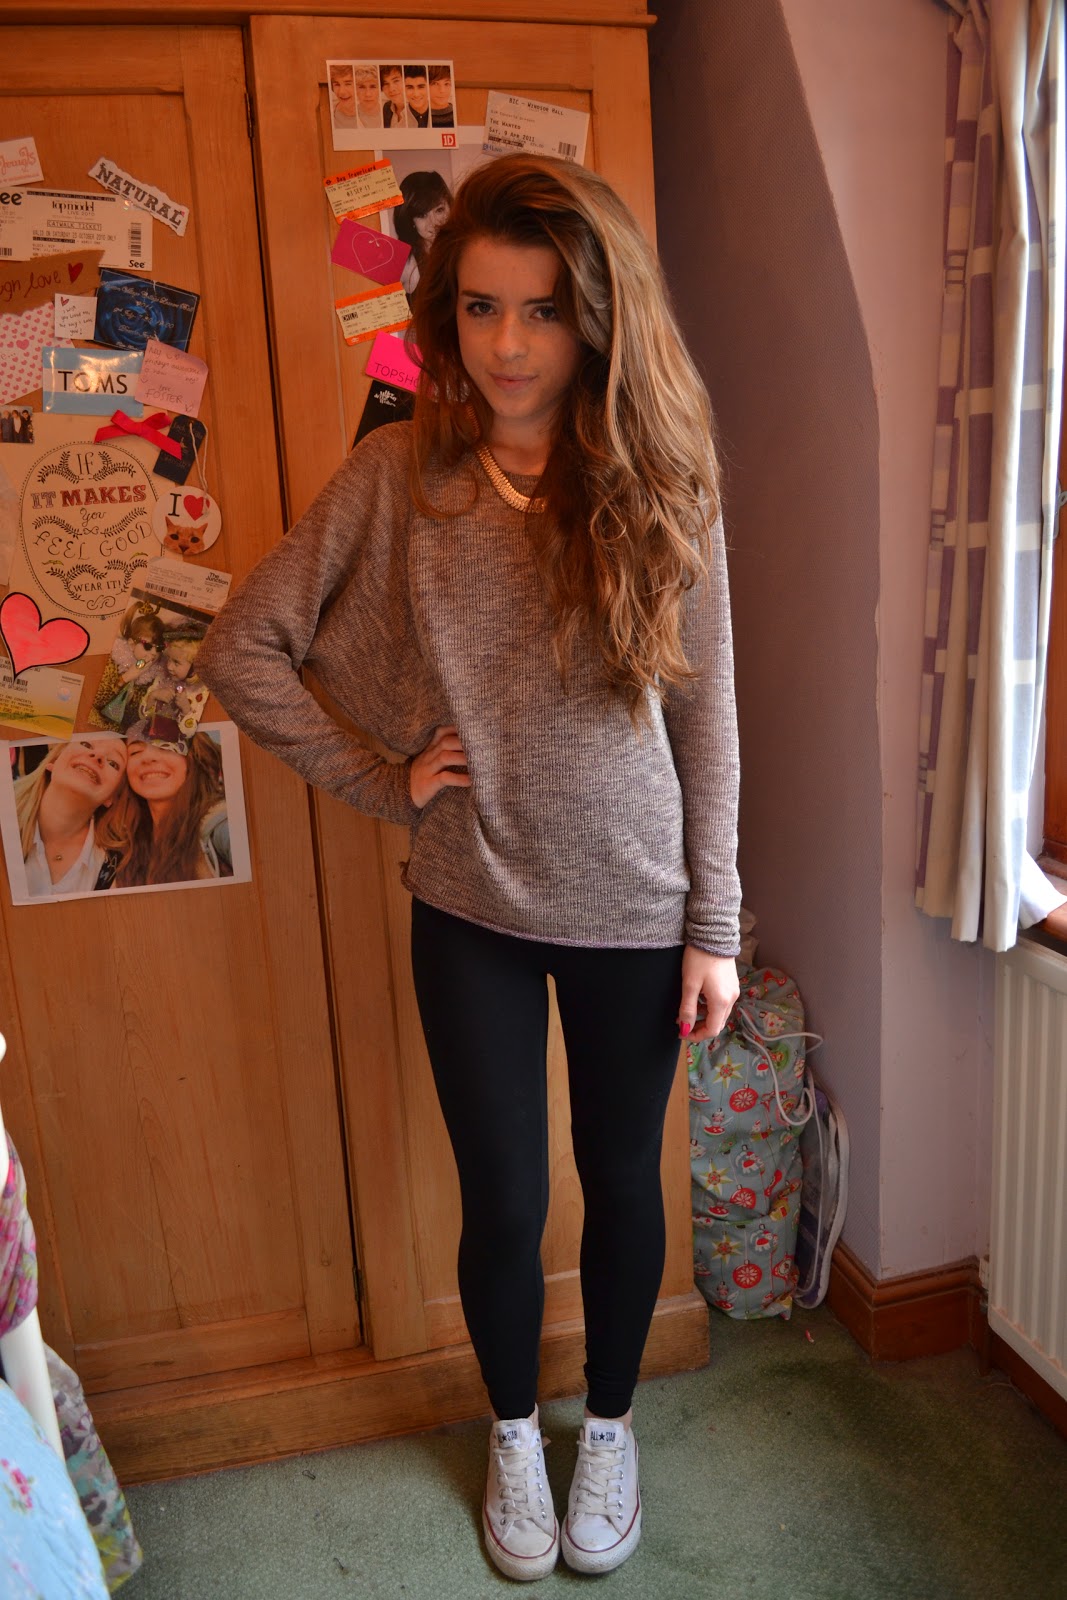 leggings and converse outfit